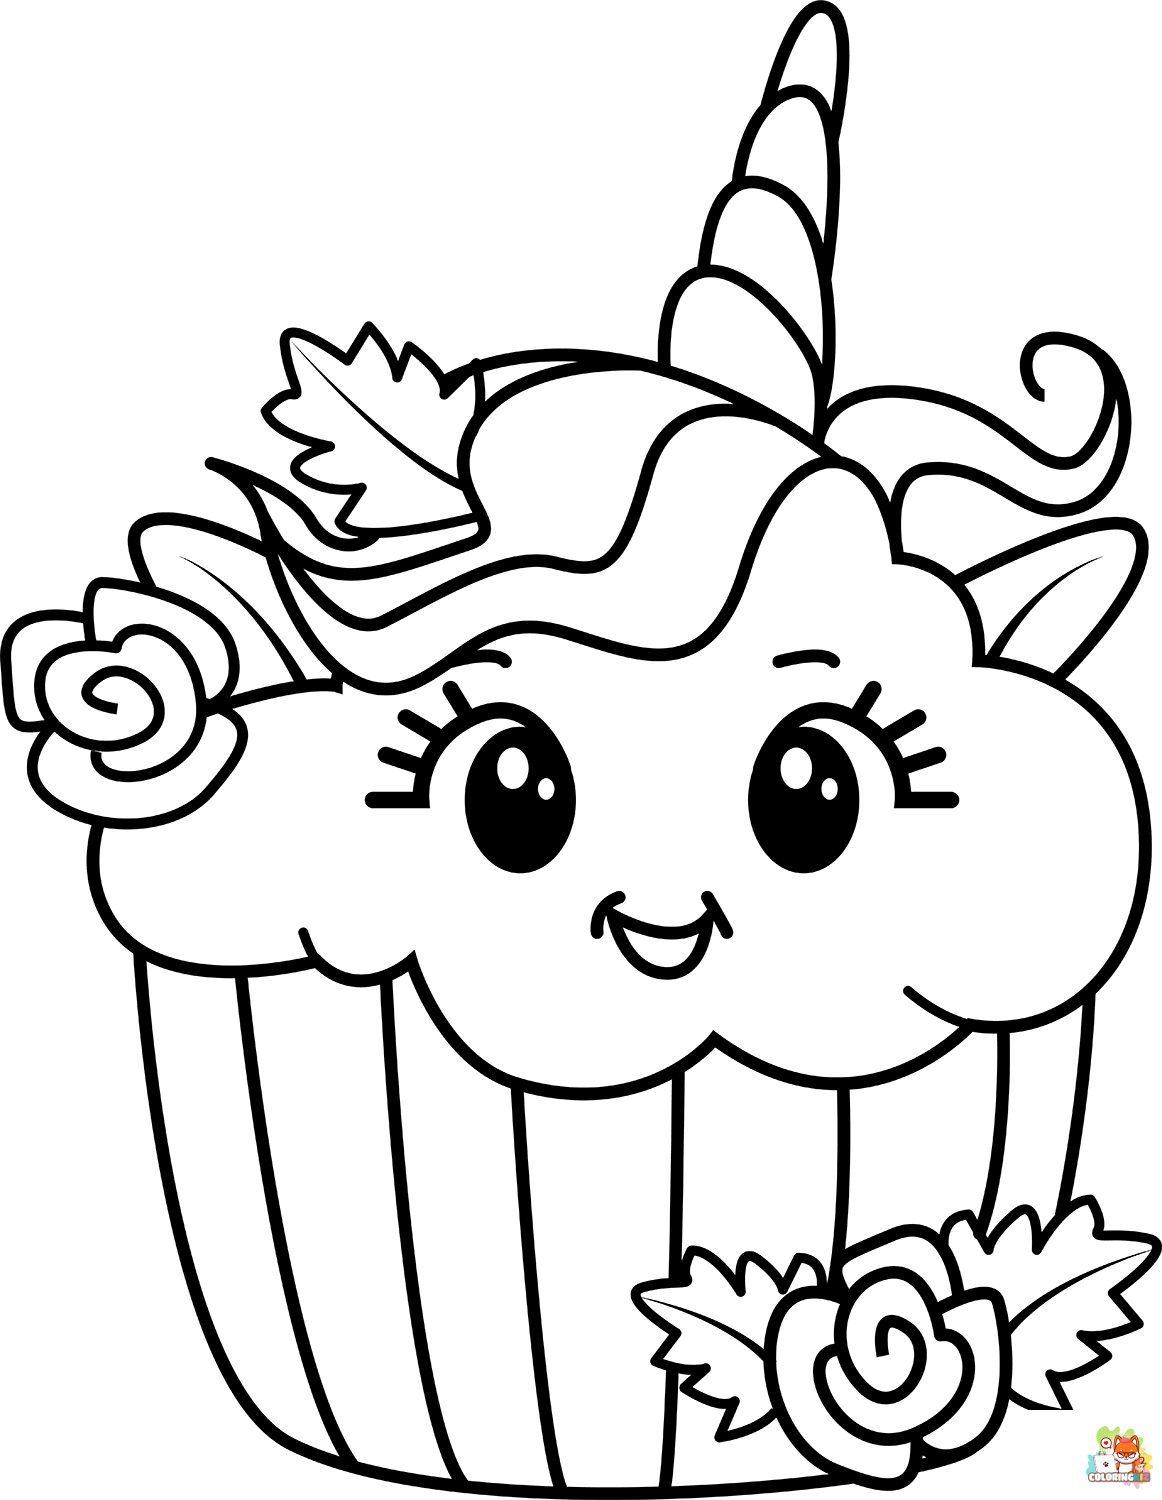 Unicorn Cake Coloring Pages 1